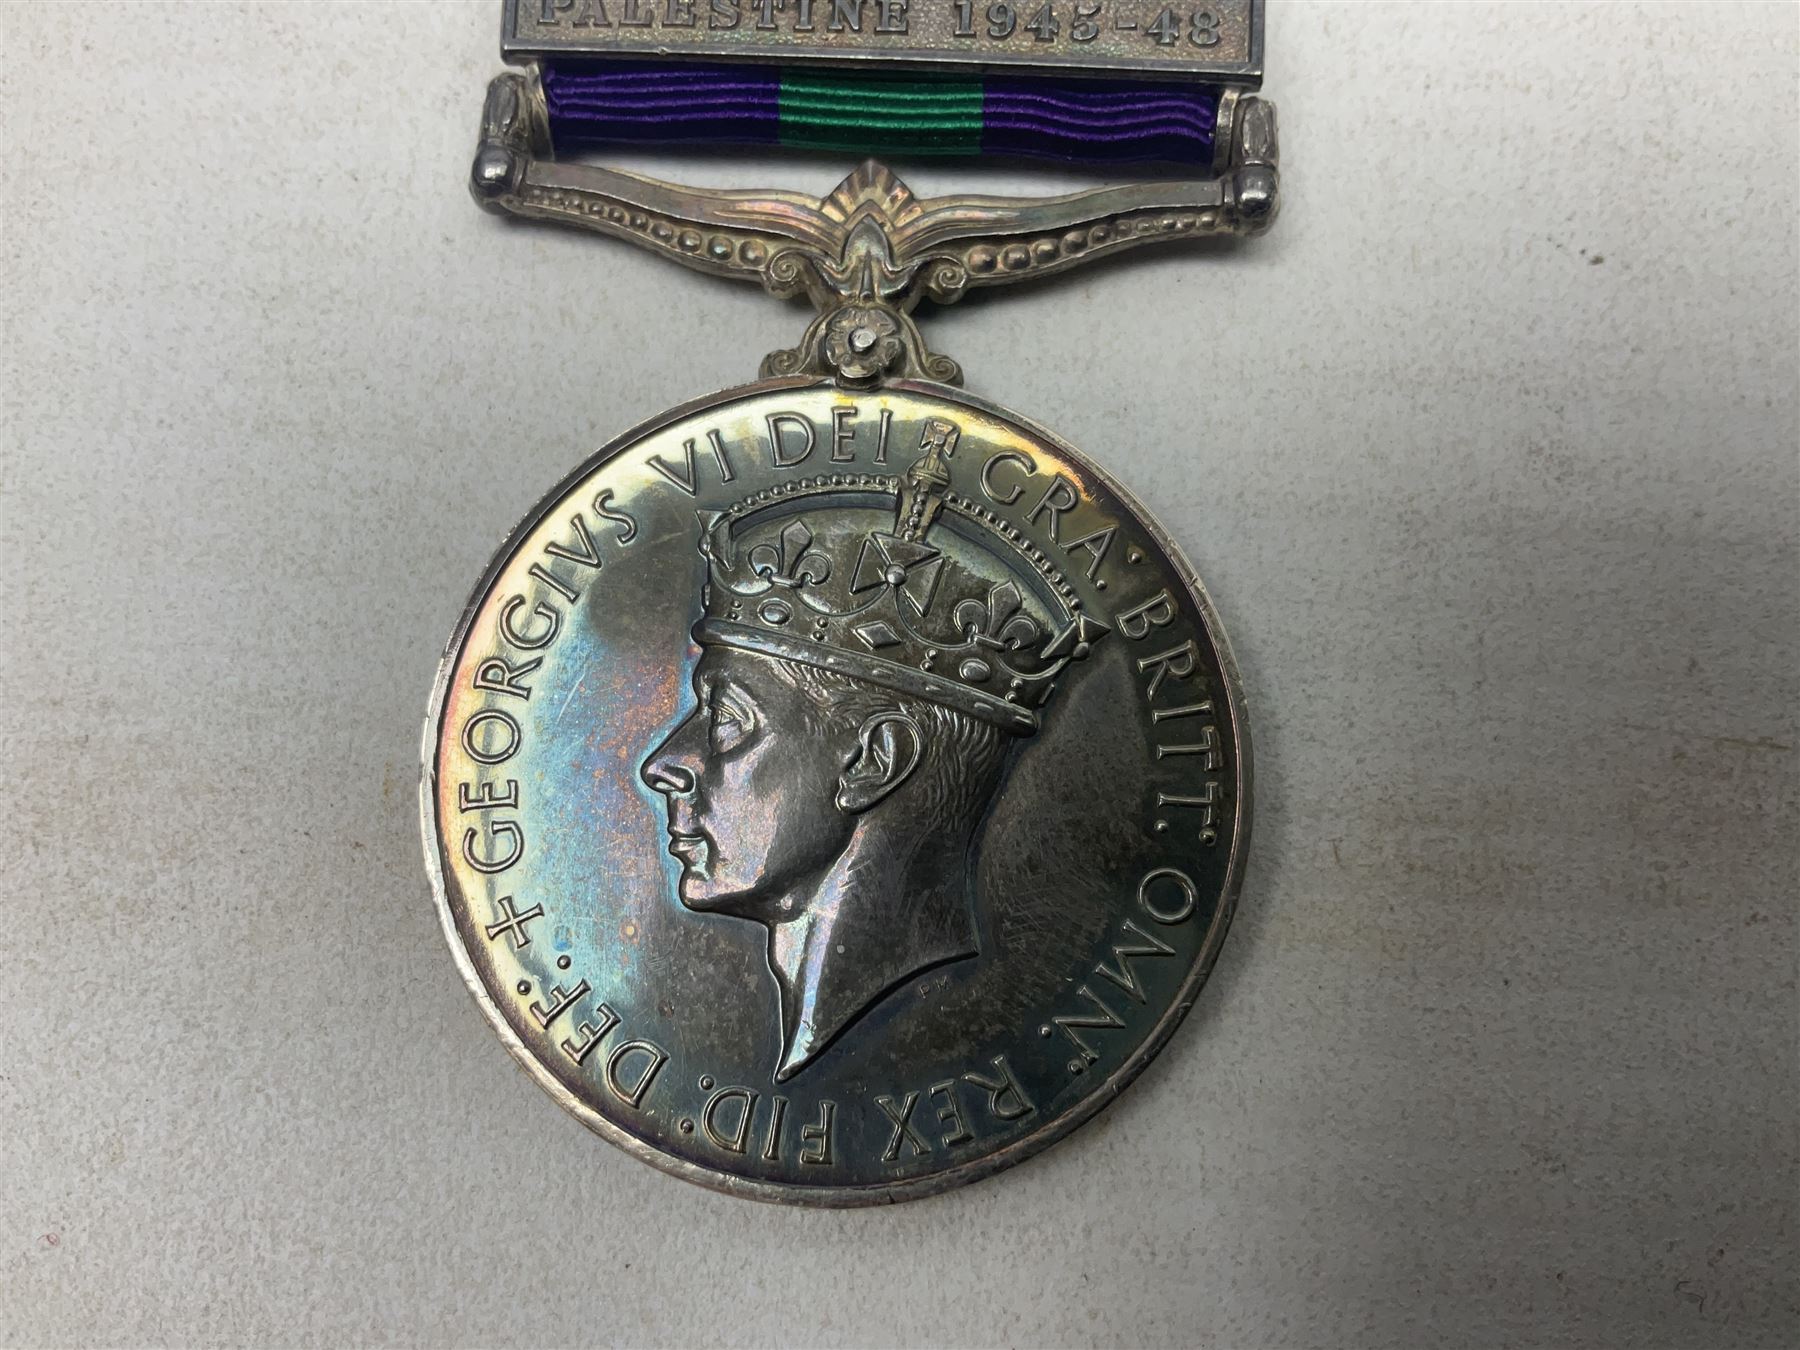 George VI General Service Medal with Palestine 1945-48 clasp awarded to 19117460 Pte. P. Tilmouth R. - Image 2 of 8